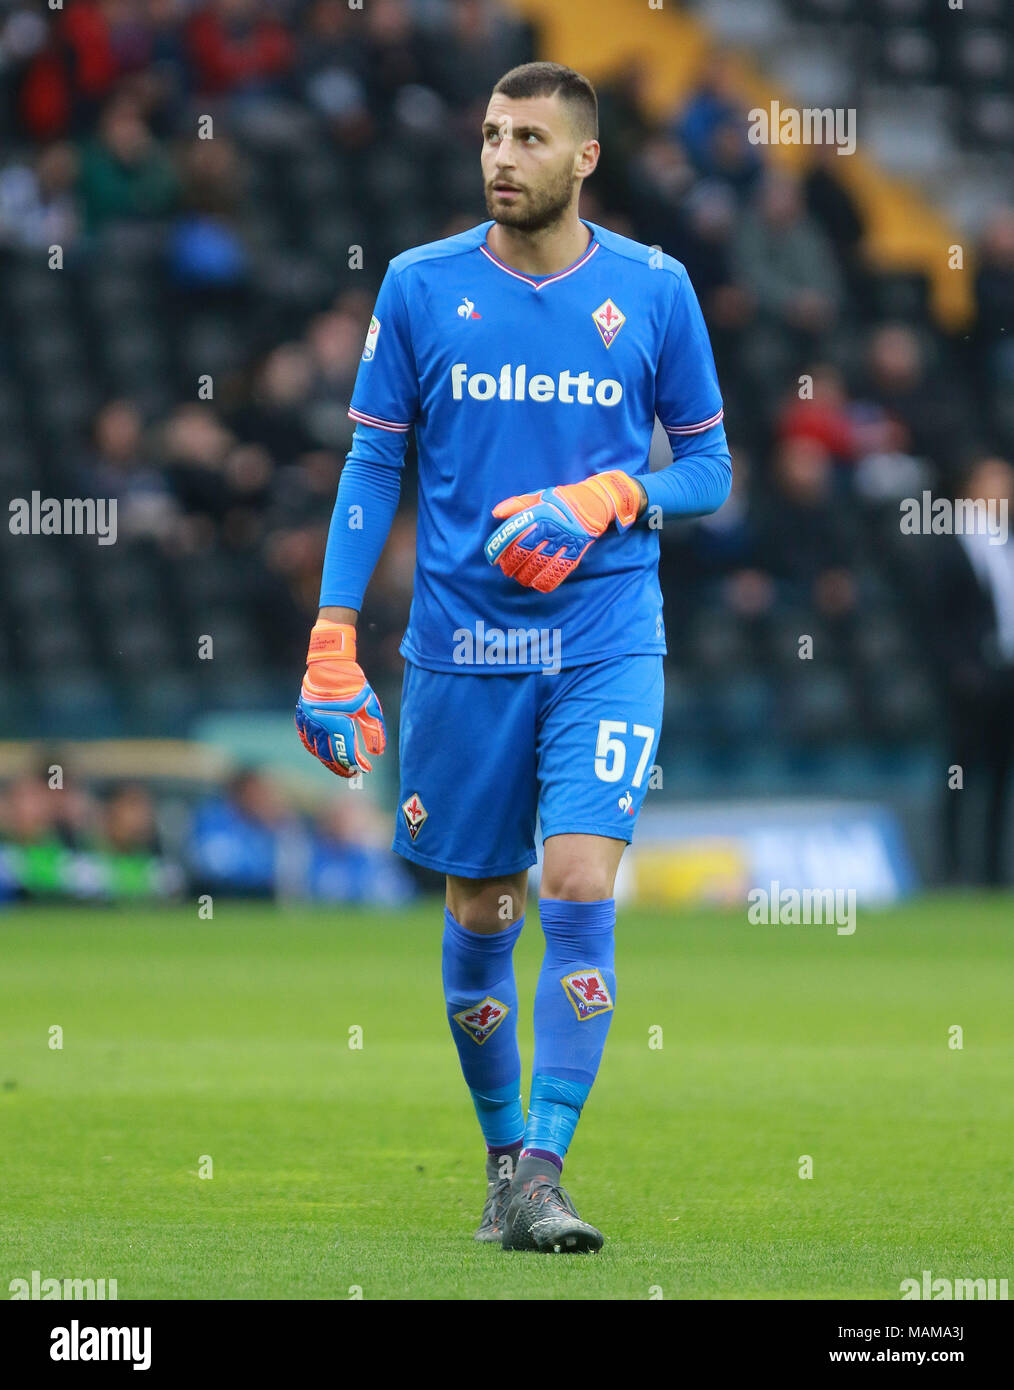 Udine, Italy. 3rd April, 2018. ITALY, Udine: Fiorentina's goalkeeper Marco Sportello looks during the Serie A football match between Udinese Calcio v AC Fiorentina at Dacia Arena Stadium on 3rd April, 2018. Credit: Andrea Spinelli/Alamy Live News Stock Photo